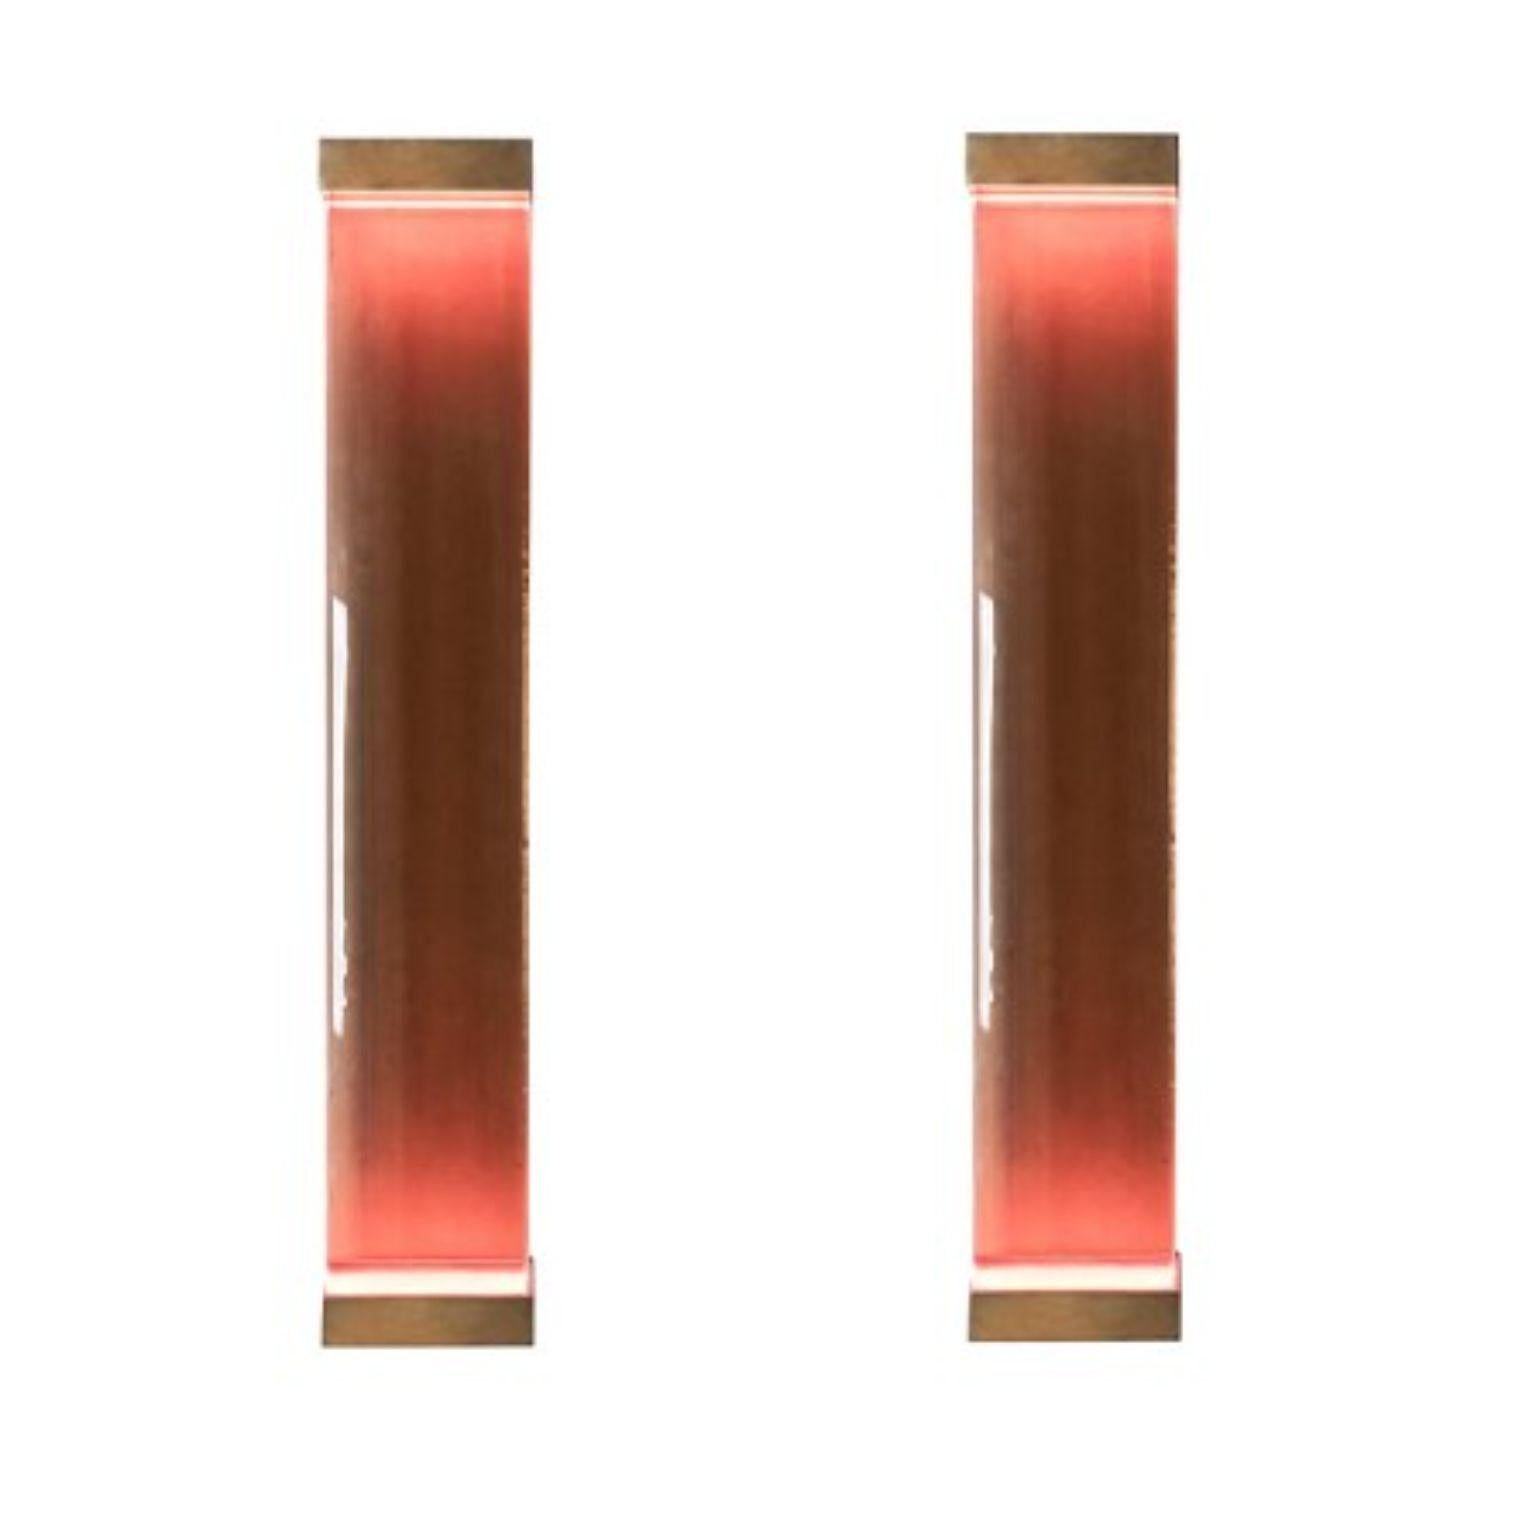 Set of 2 Jud wall lamps by Draga & Aurel
Dimensions: W 23, D 10, H 131.
Materials: resin and brass

All our lamps can be wired according to each country. If sold to the USA it will be wired for the USA for instance.

Inspired by minimalism,